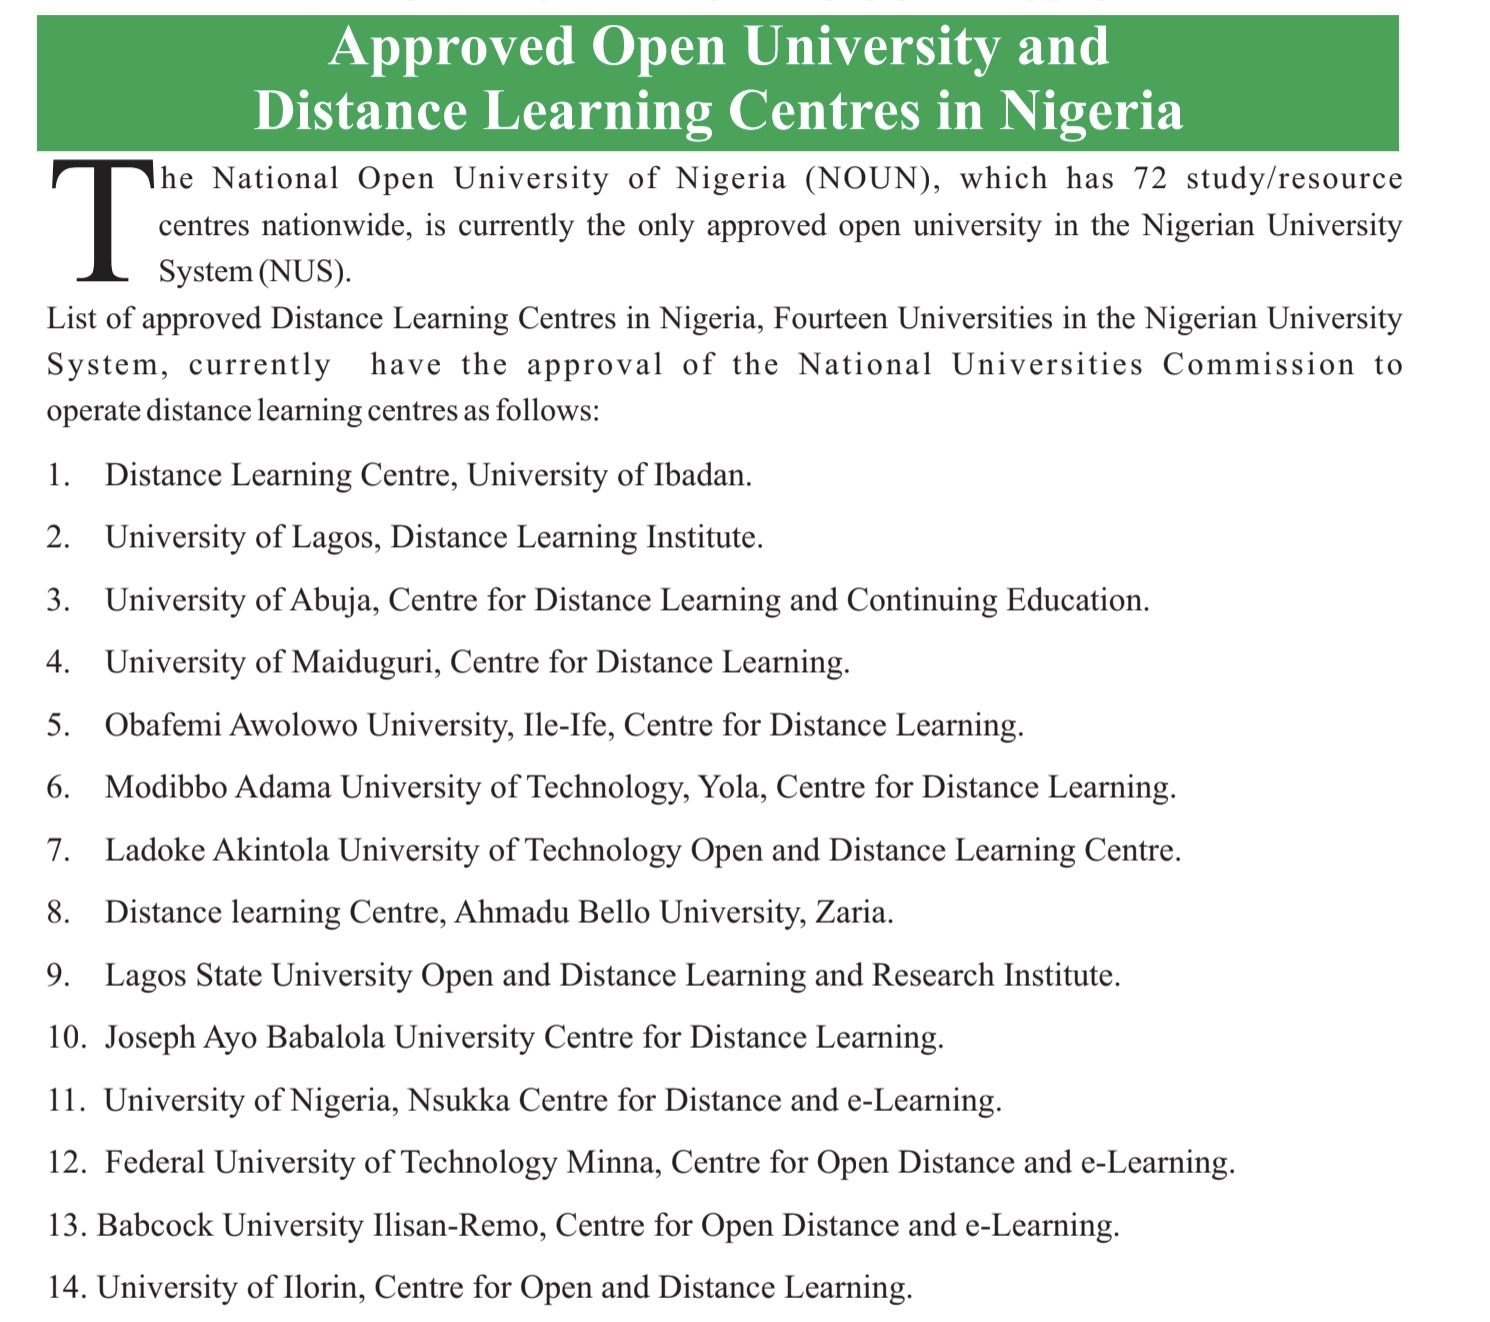 Approved Open University and Distance Learning Centres